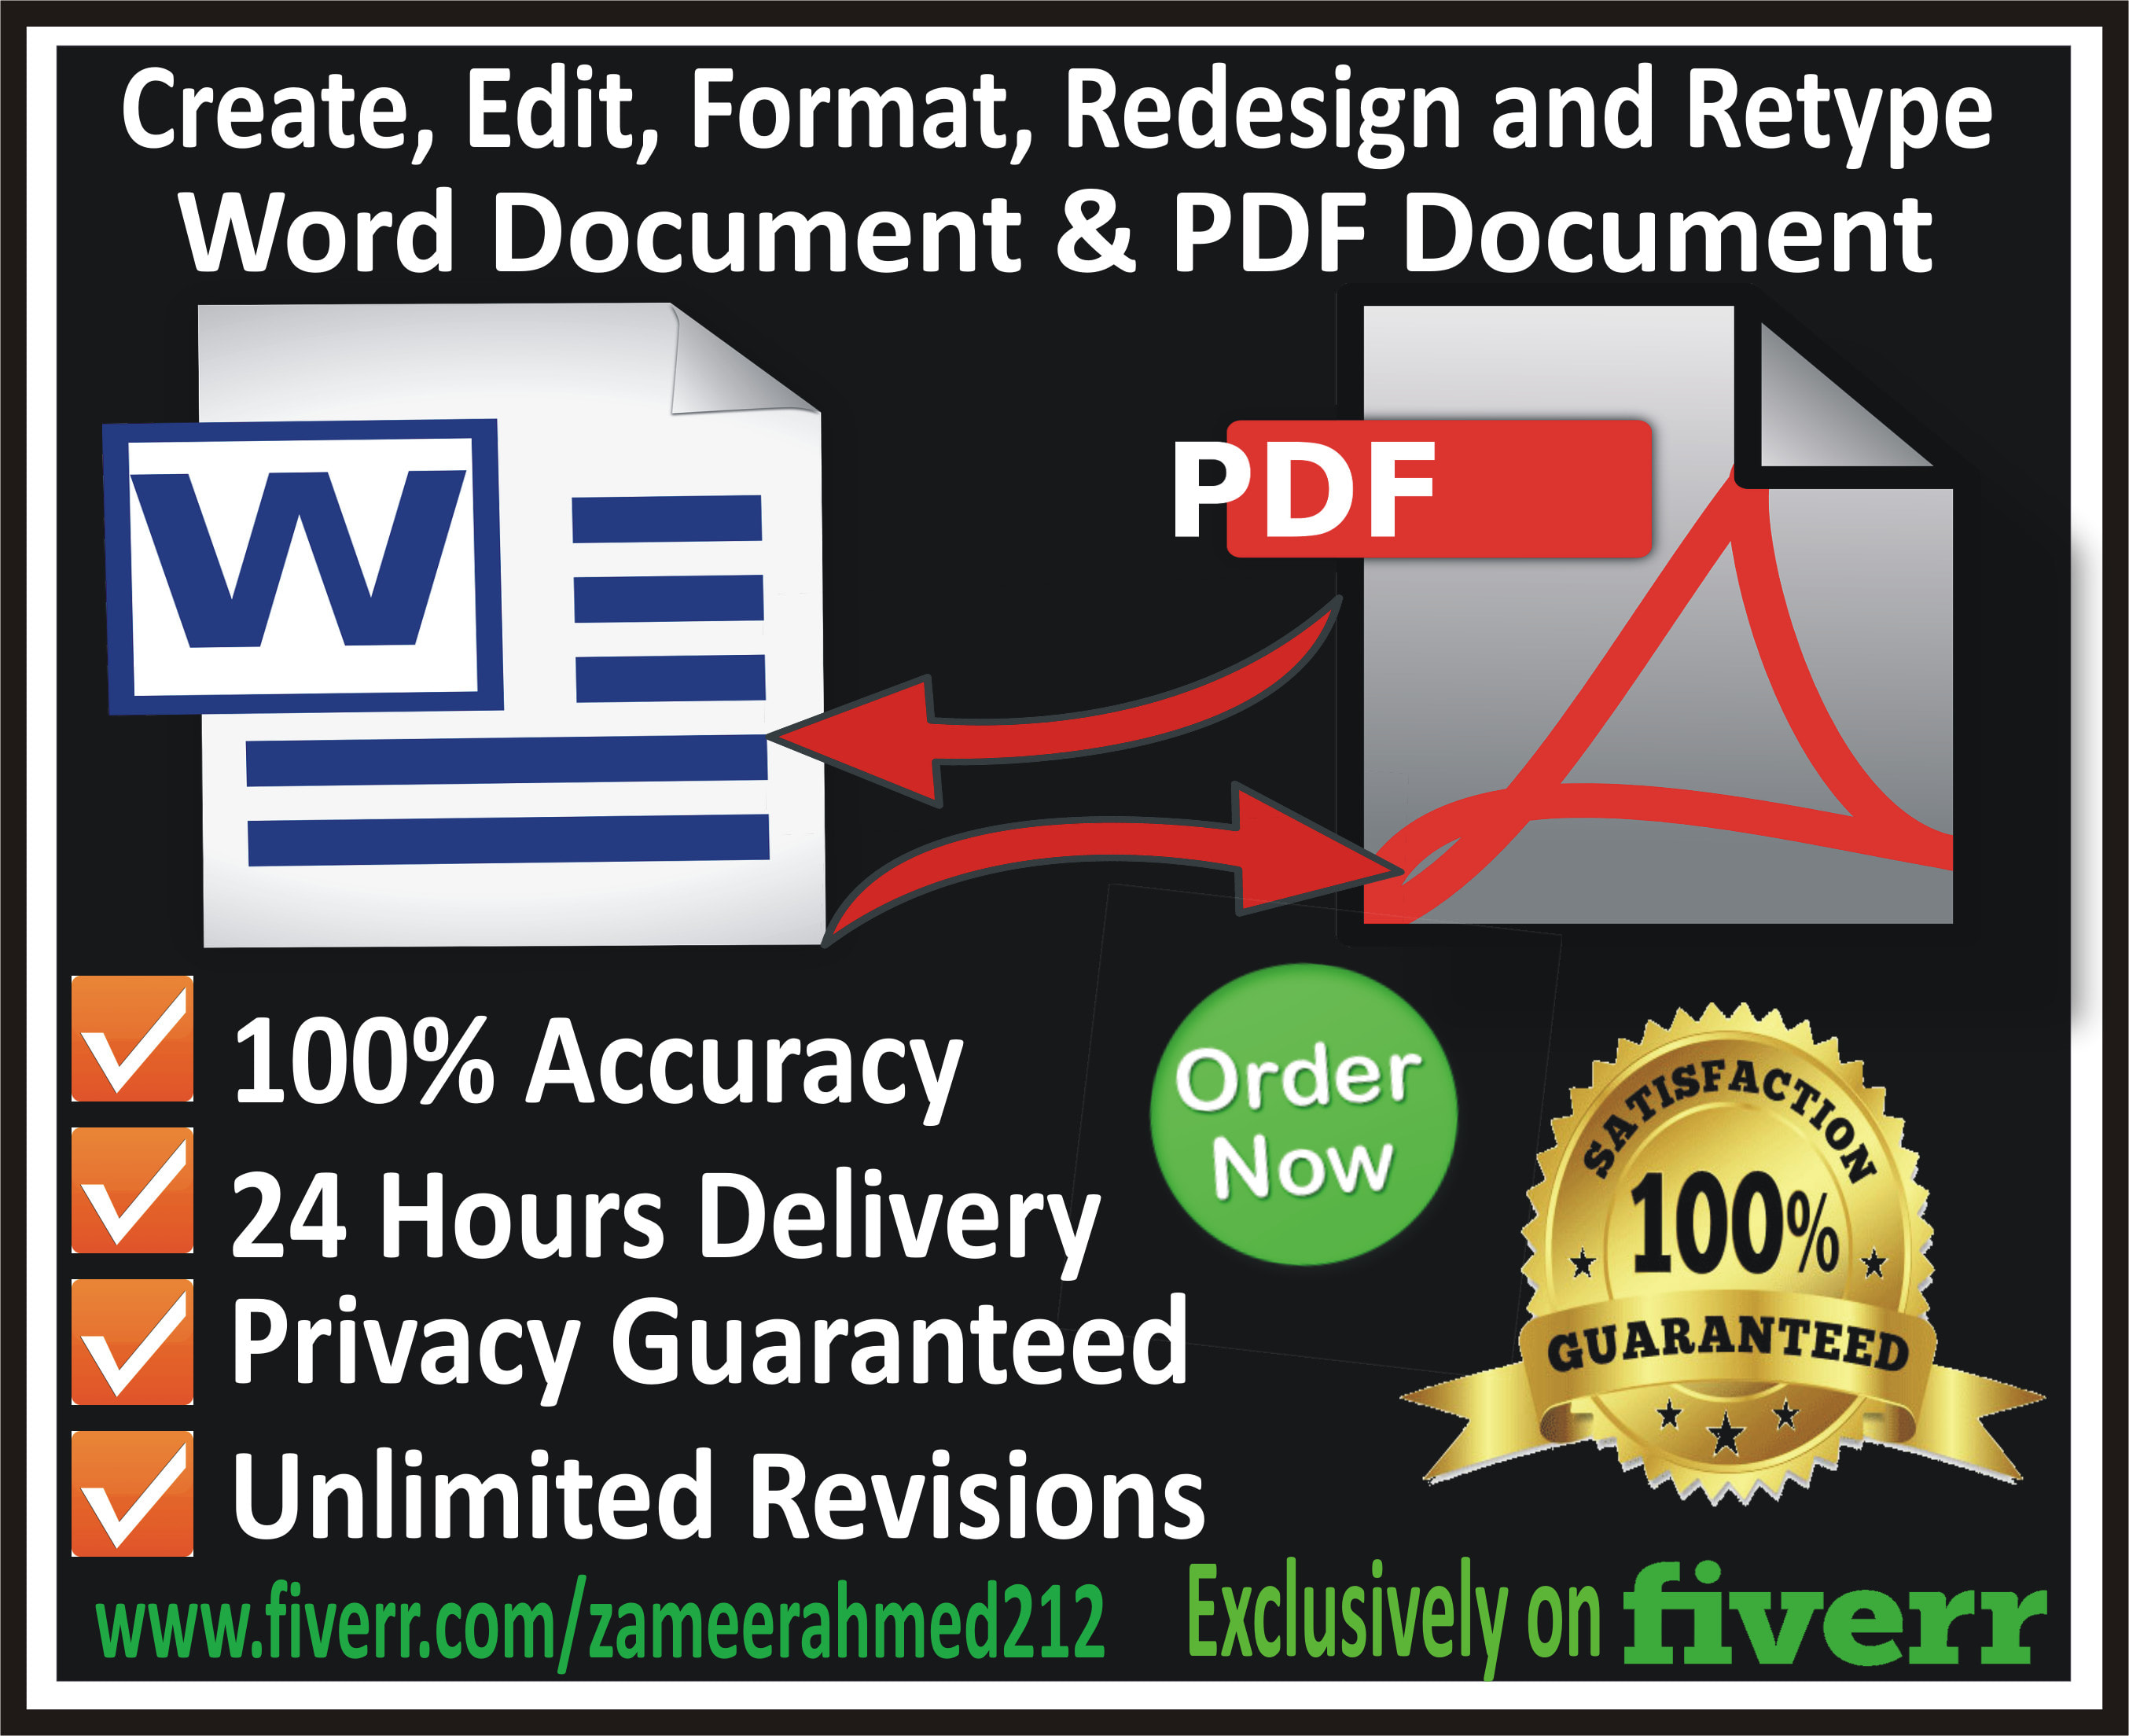 Format And Design Your Microsoft Word Document By Zameerahmed212